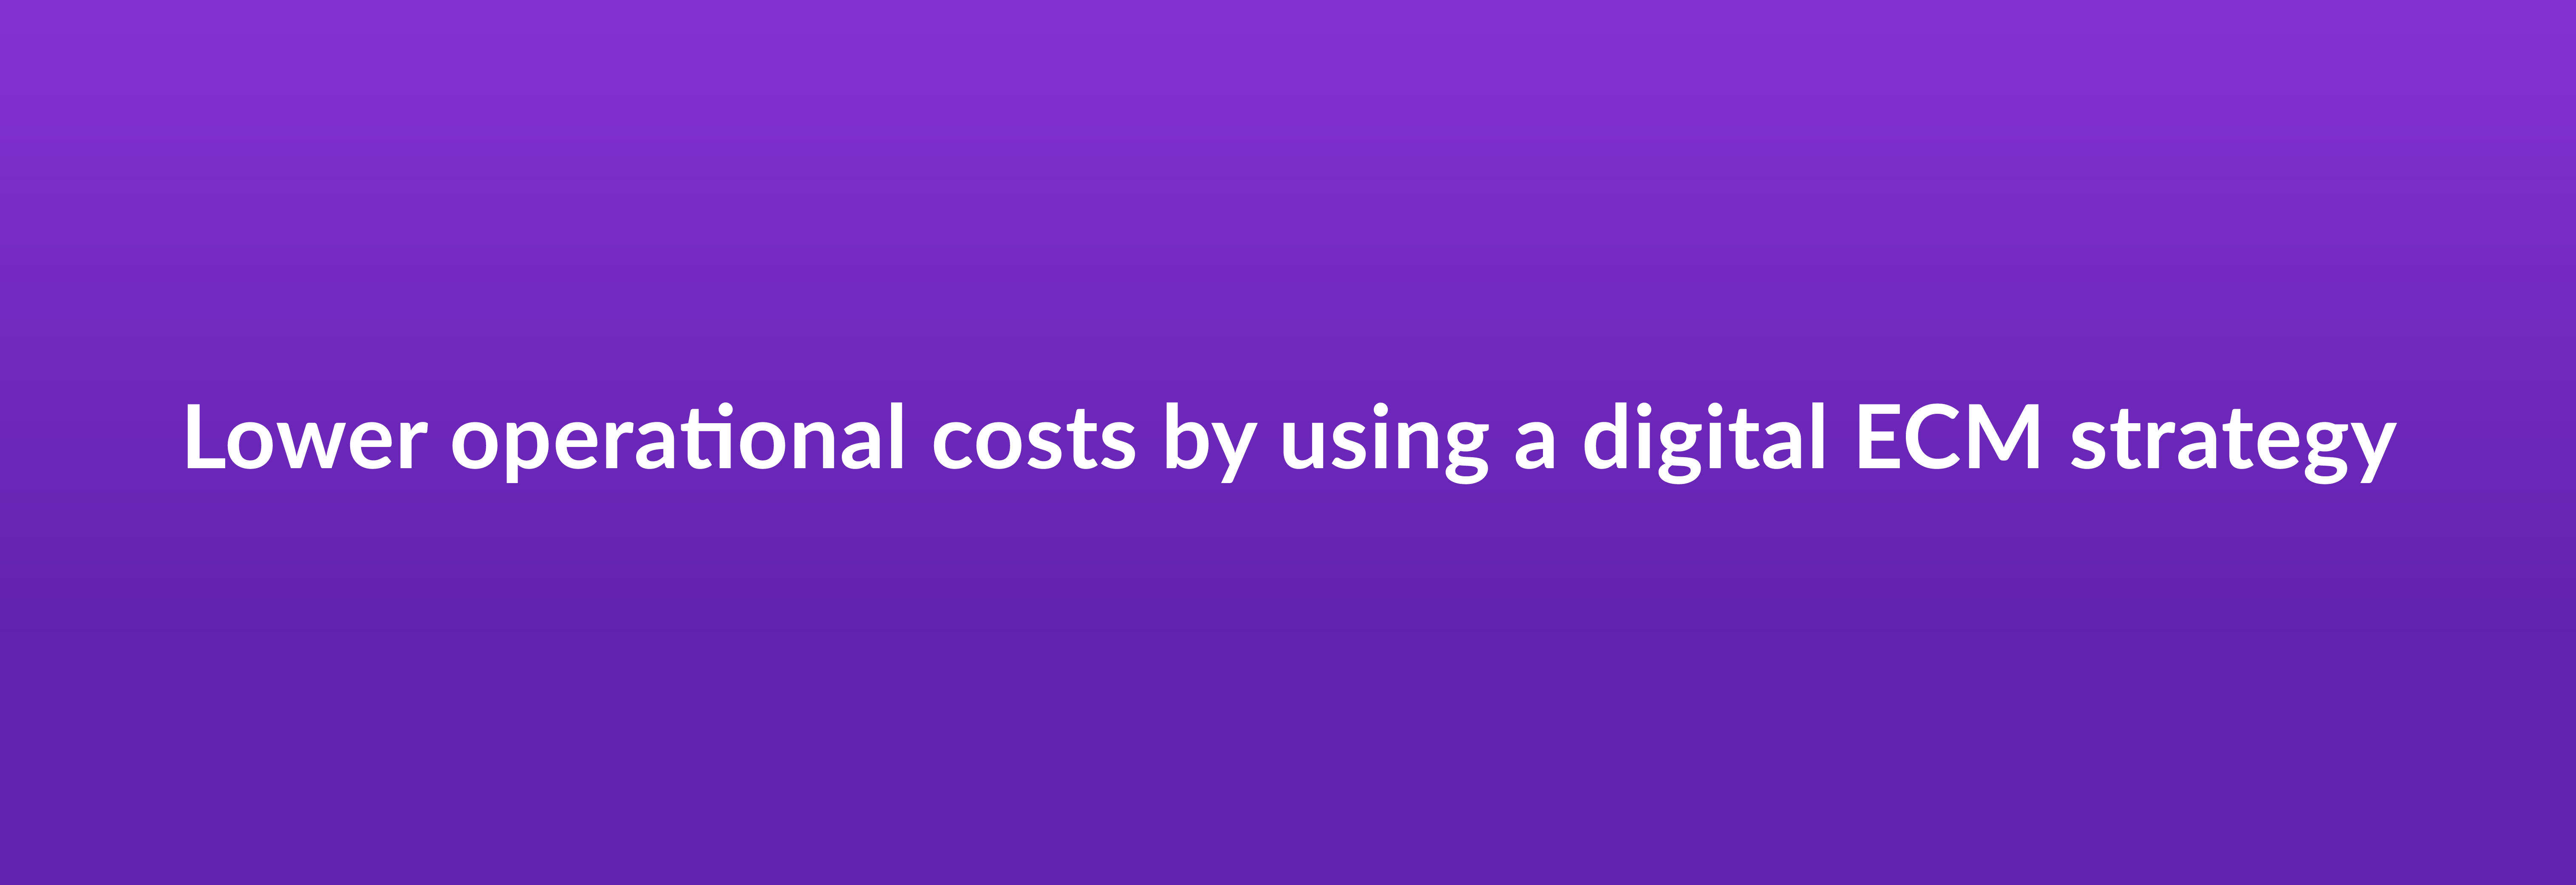 Lower operational costs by using a digital ECM strategy